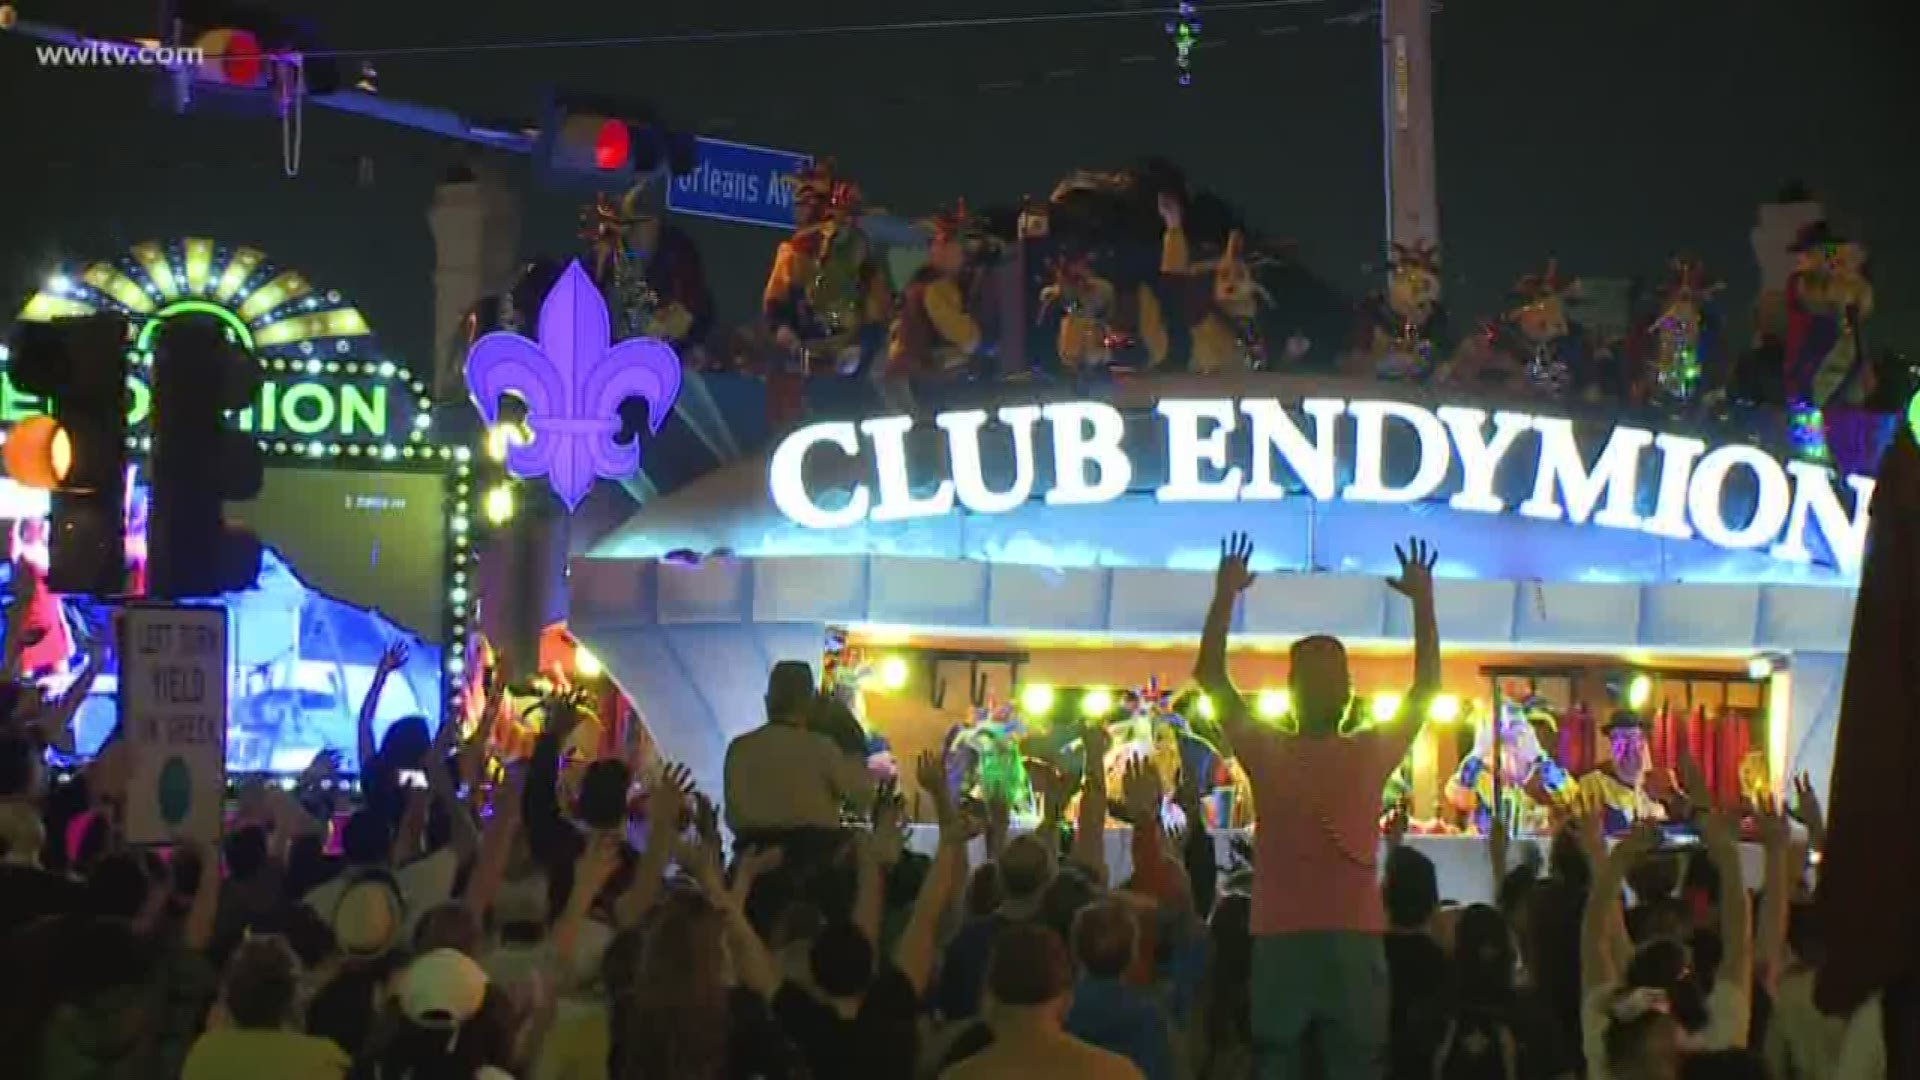 Endymion will also provide additional security around the parade route